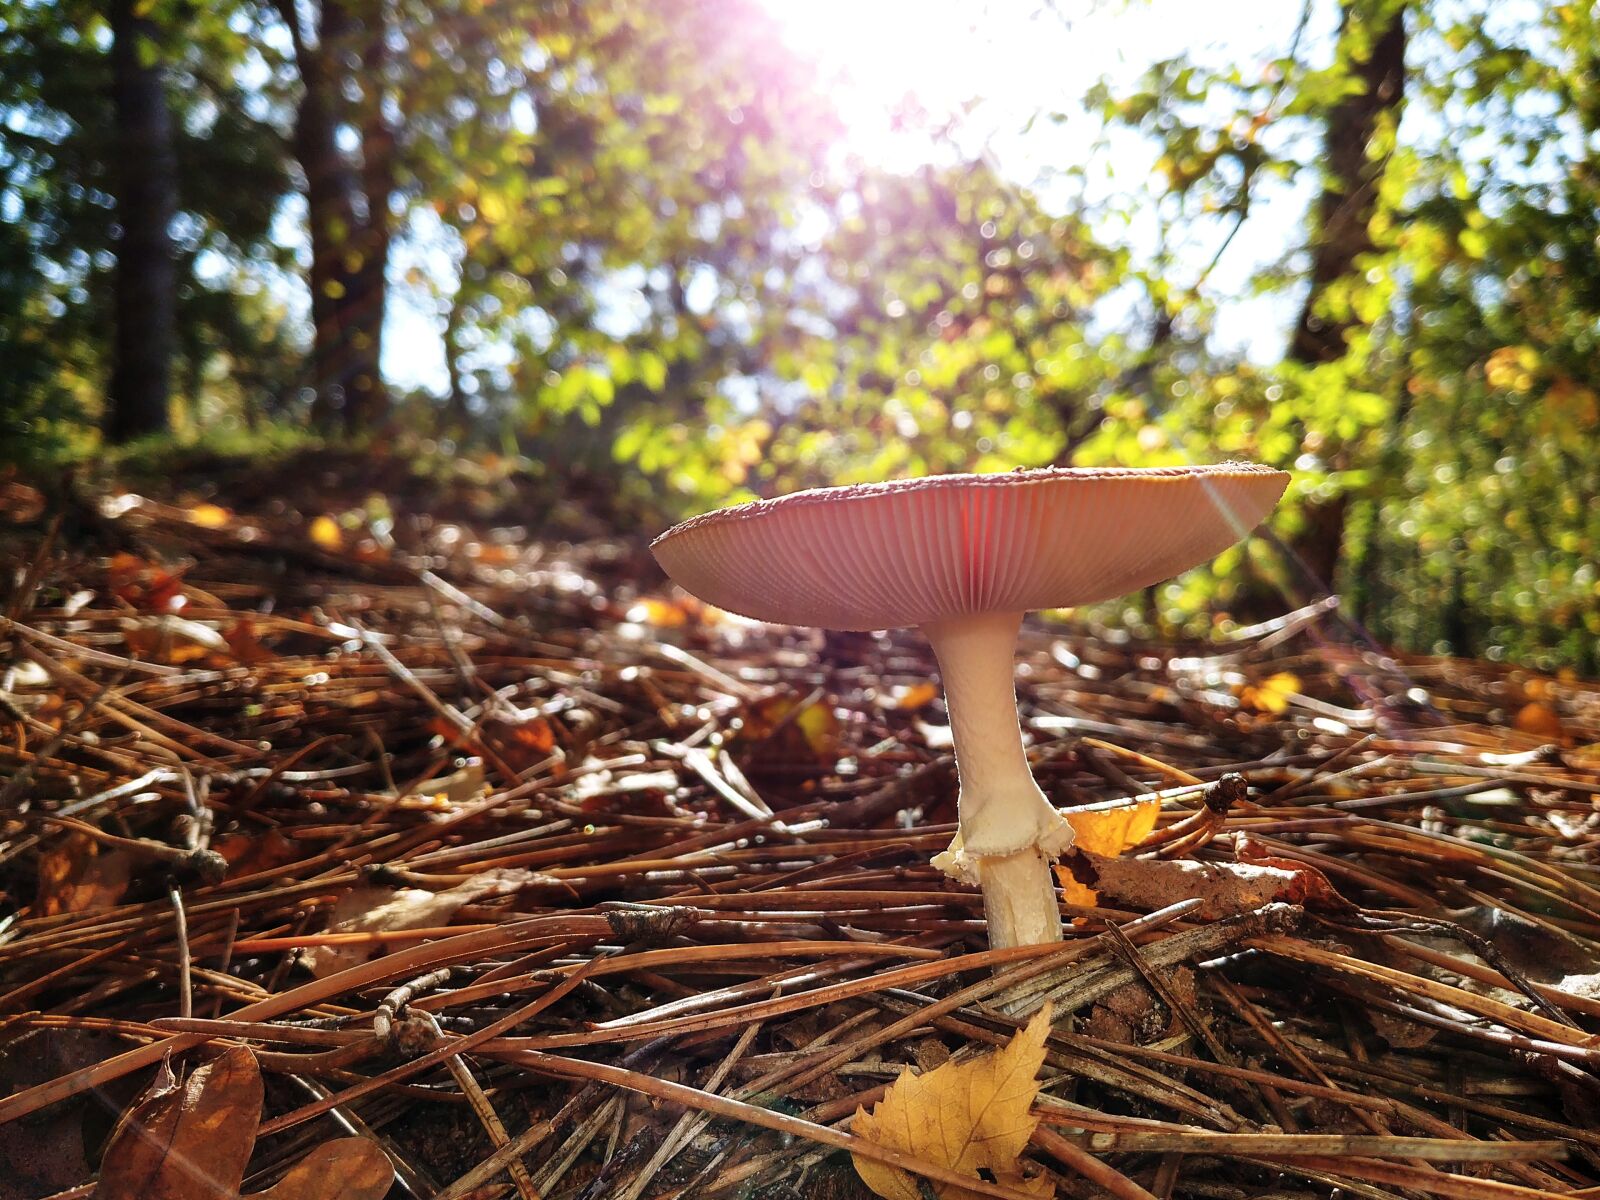 LG G6 sample photo. Autumn, colours, blurred, background photography